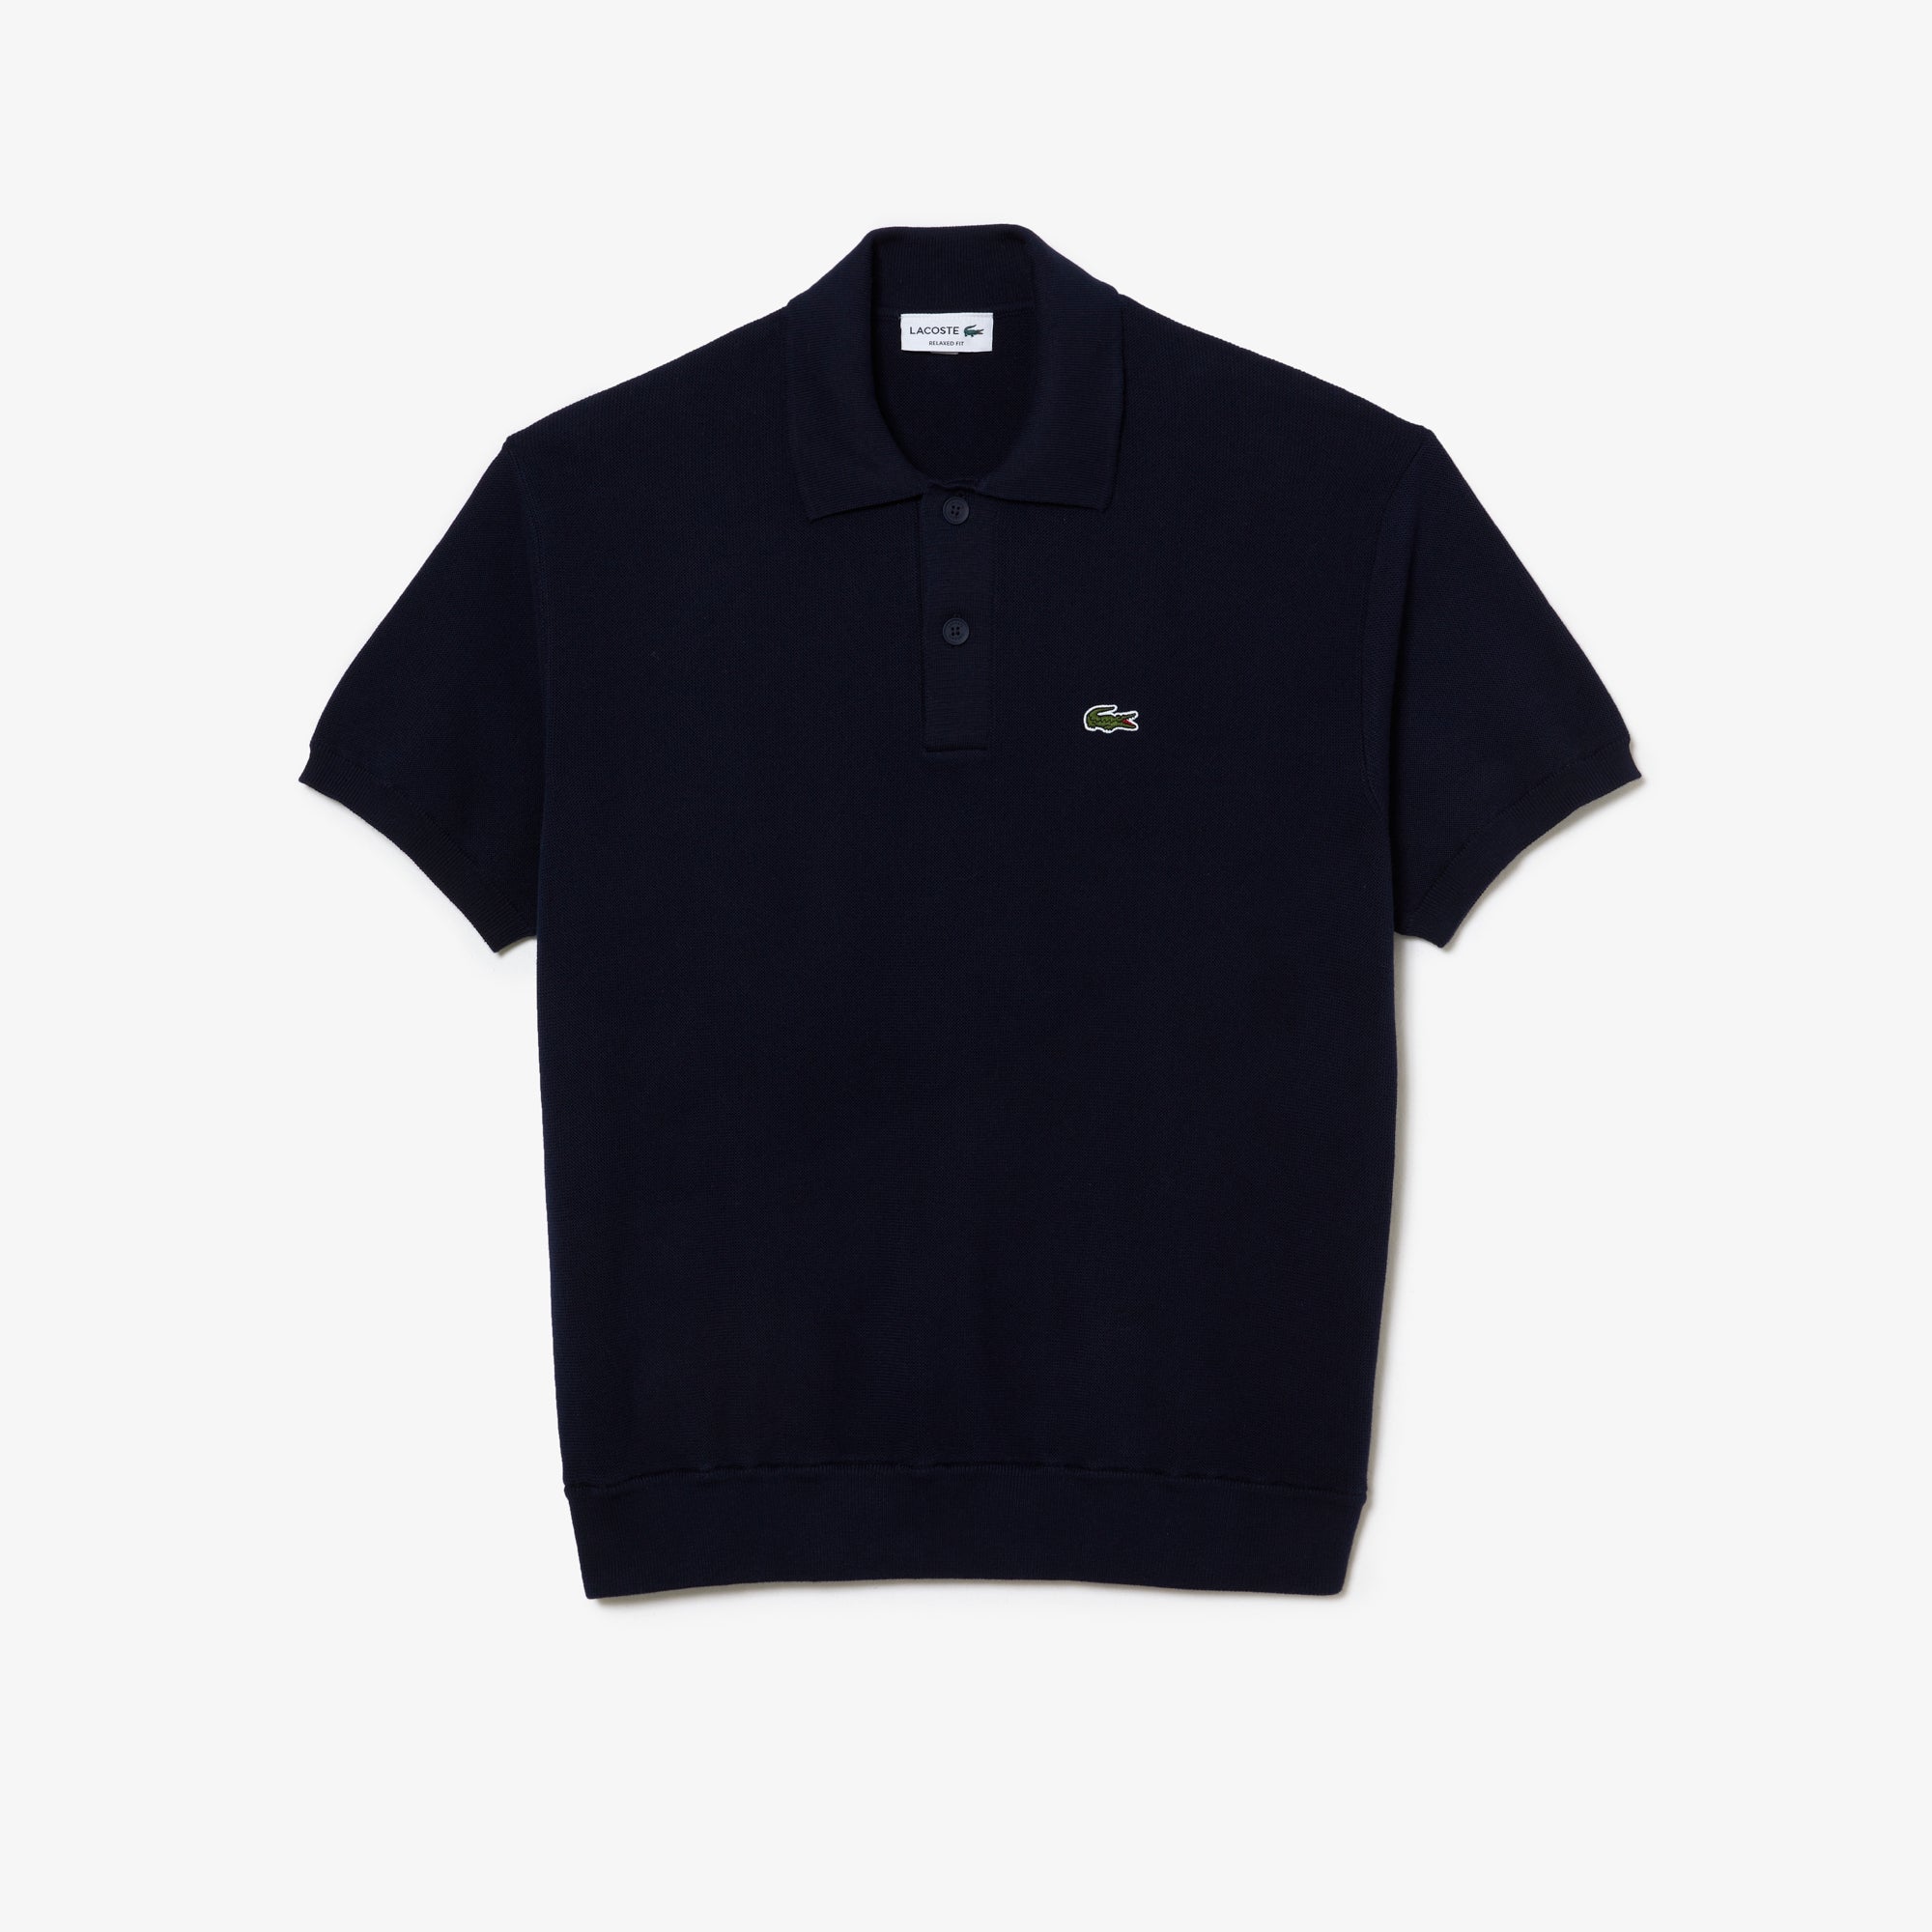 LACOSTE Men's Relaxed Fit Polo Shirt Navy Blue